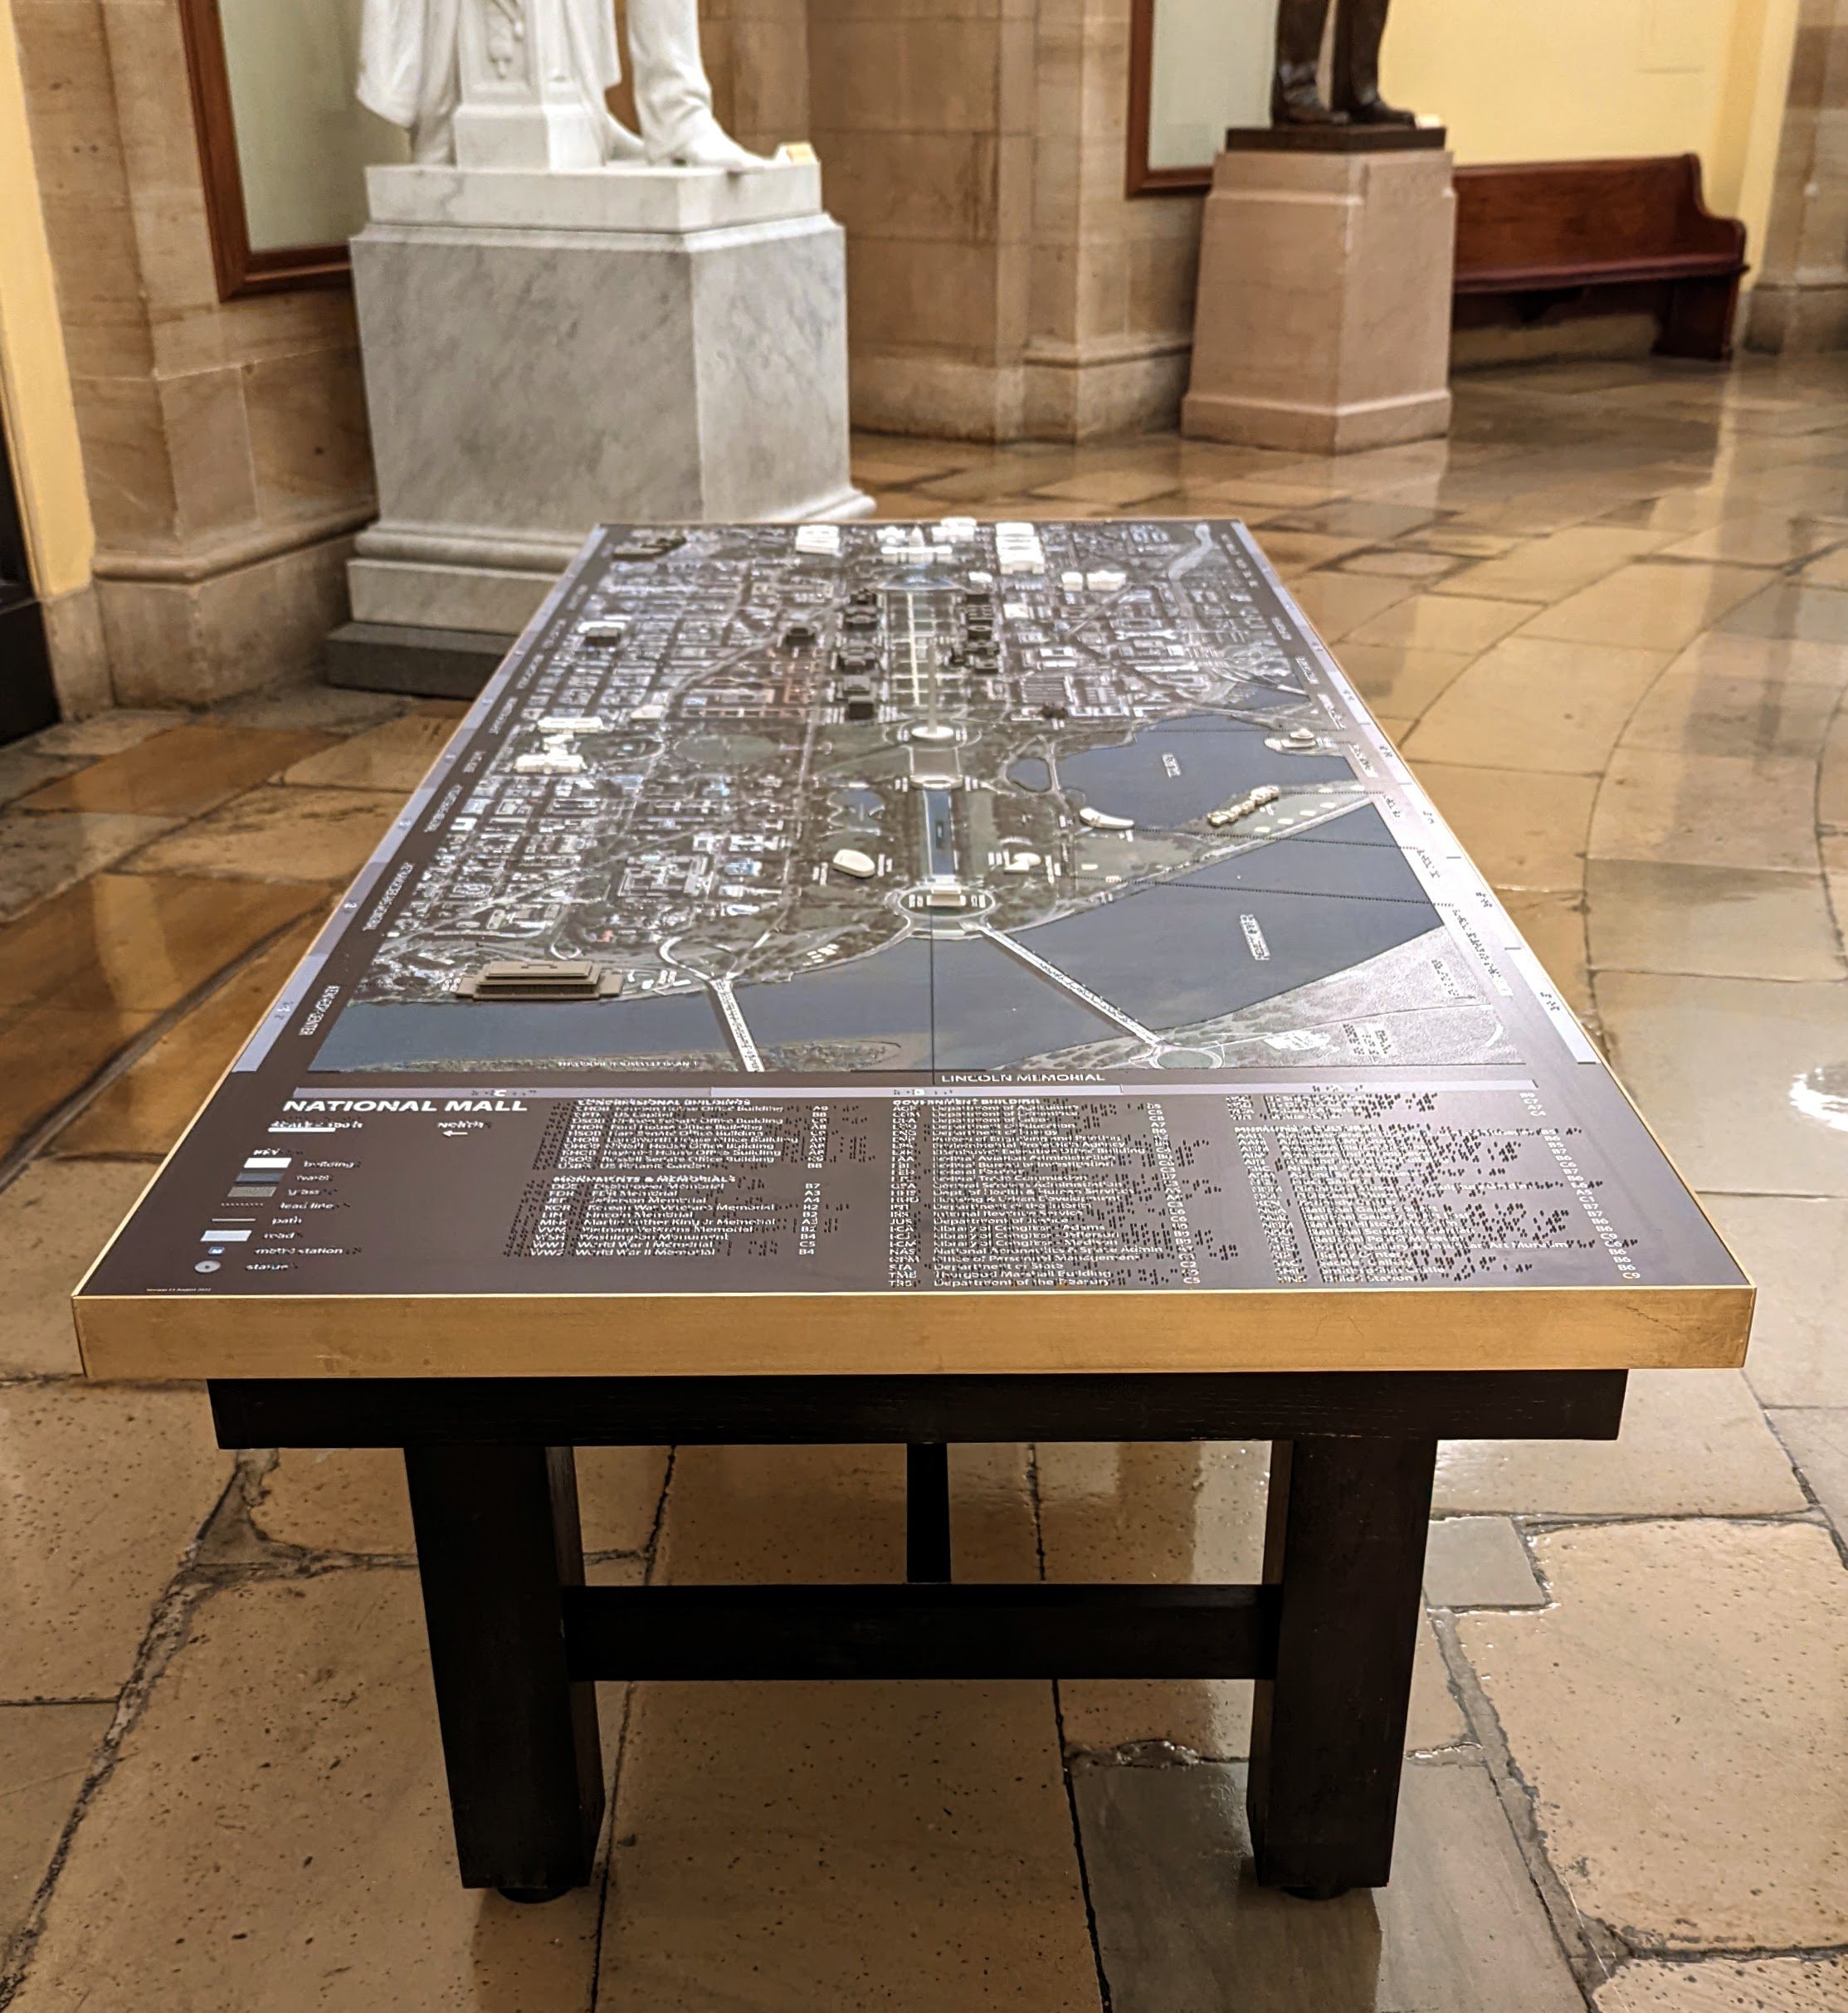 20211026 US CAPITOL MAP INSTALLED_CONCEPT REALIZATIONS_007.jpg